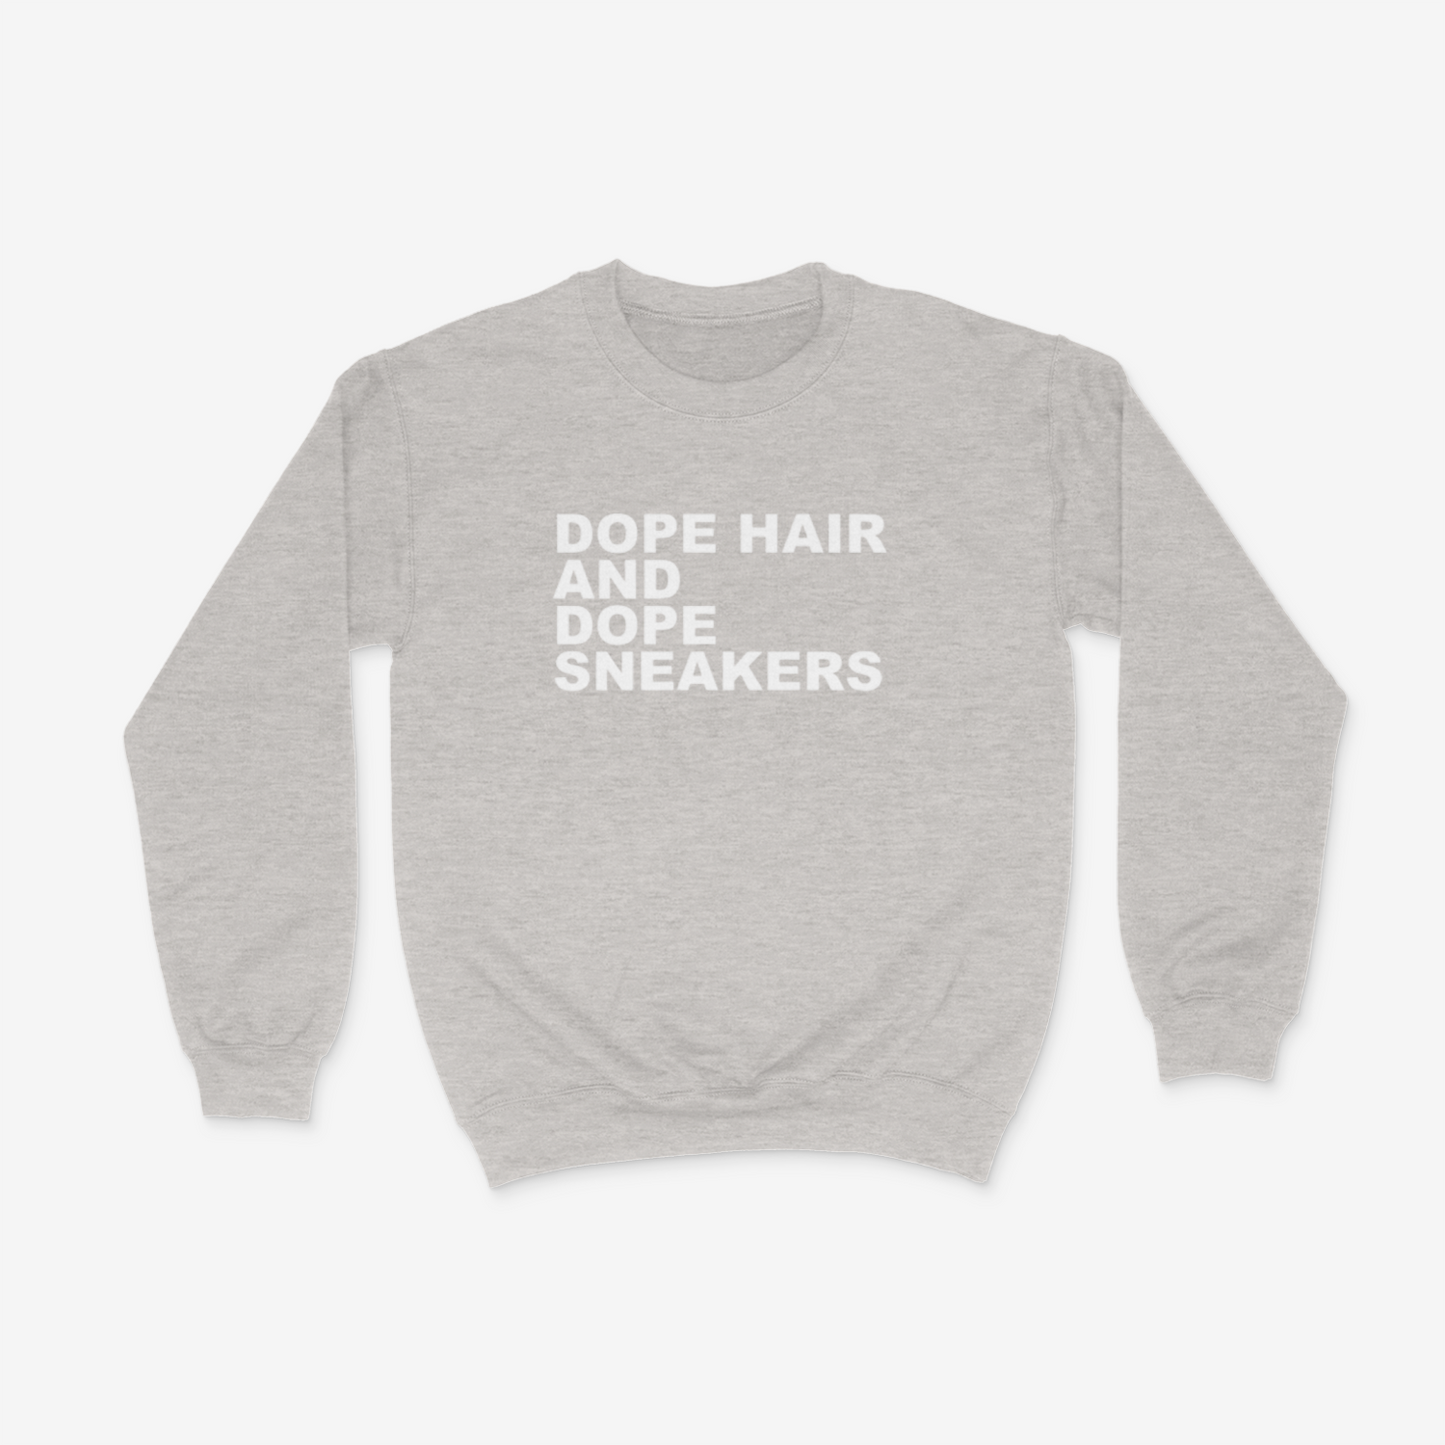 Dope Hair and Dope Sneakers Crewneck( White)